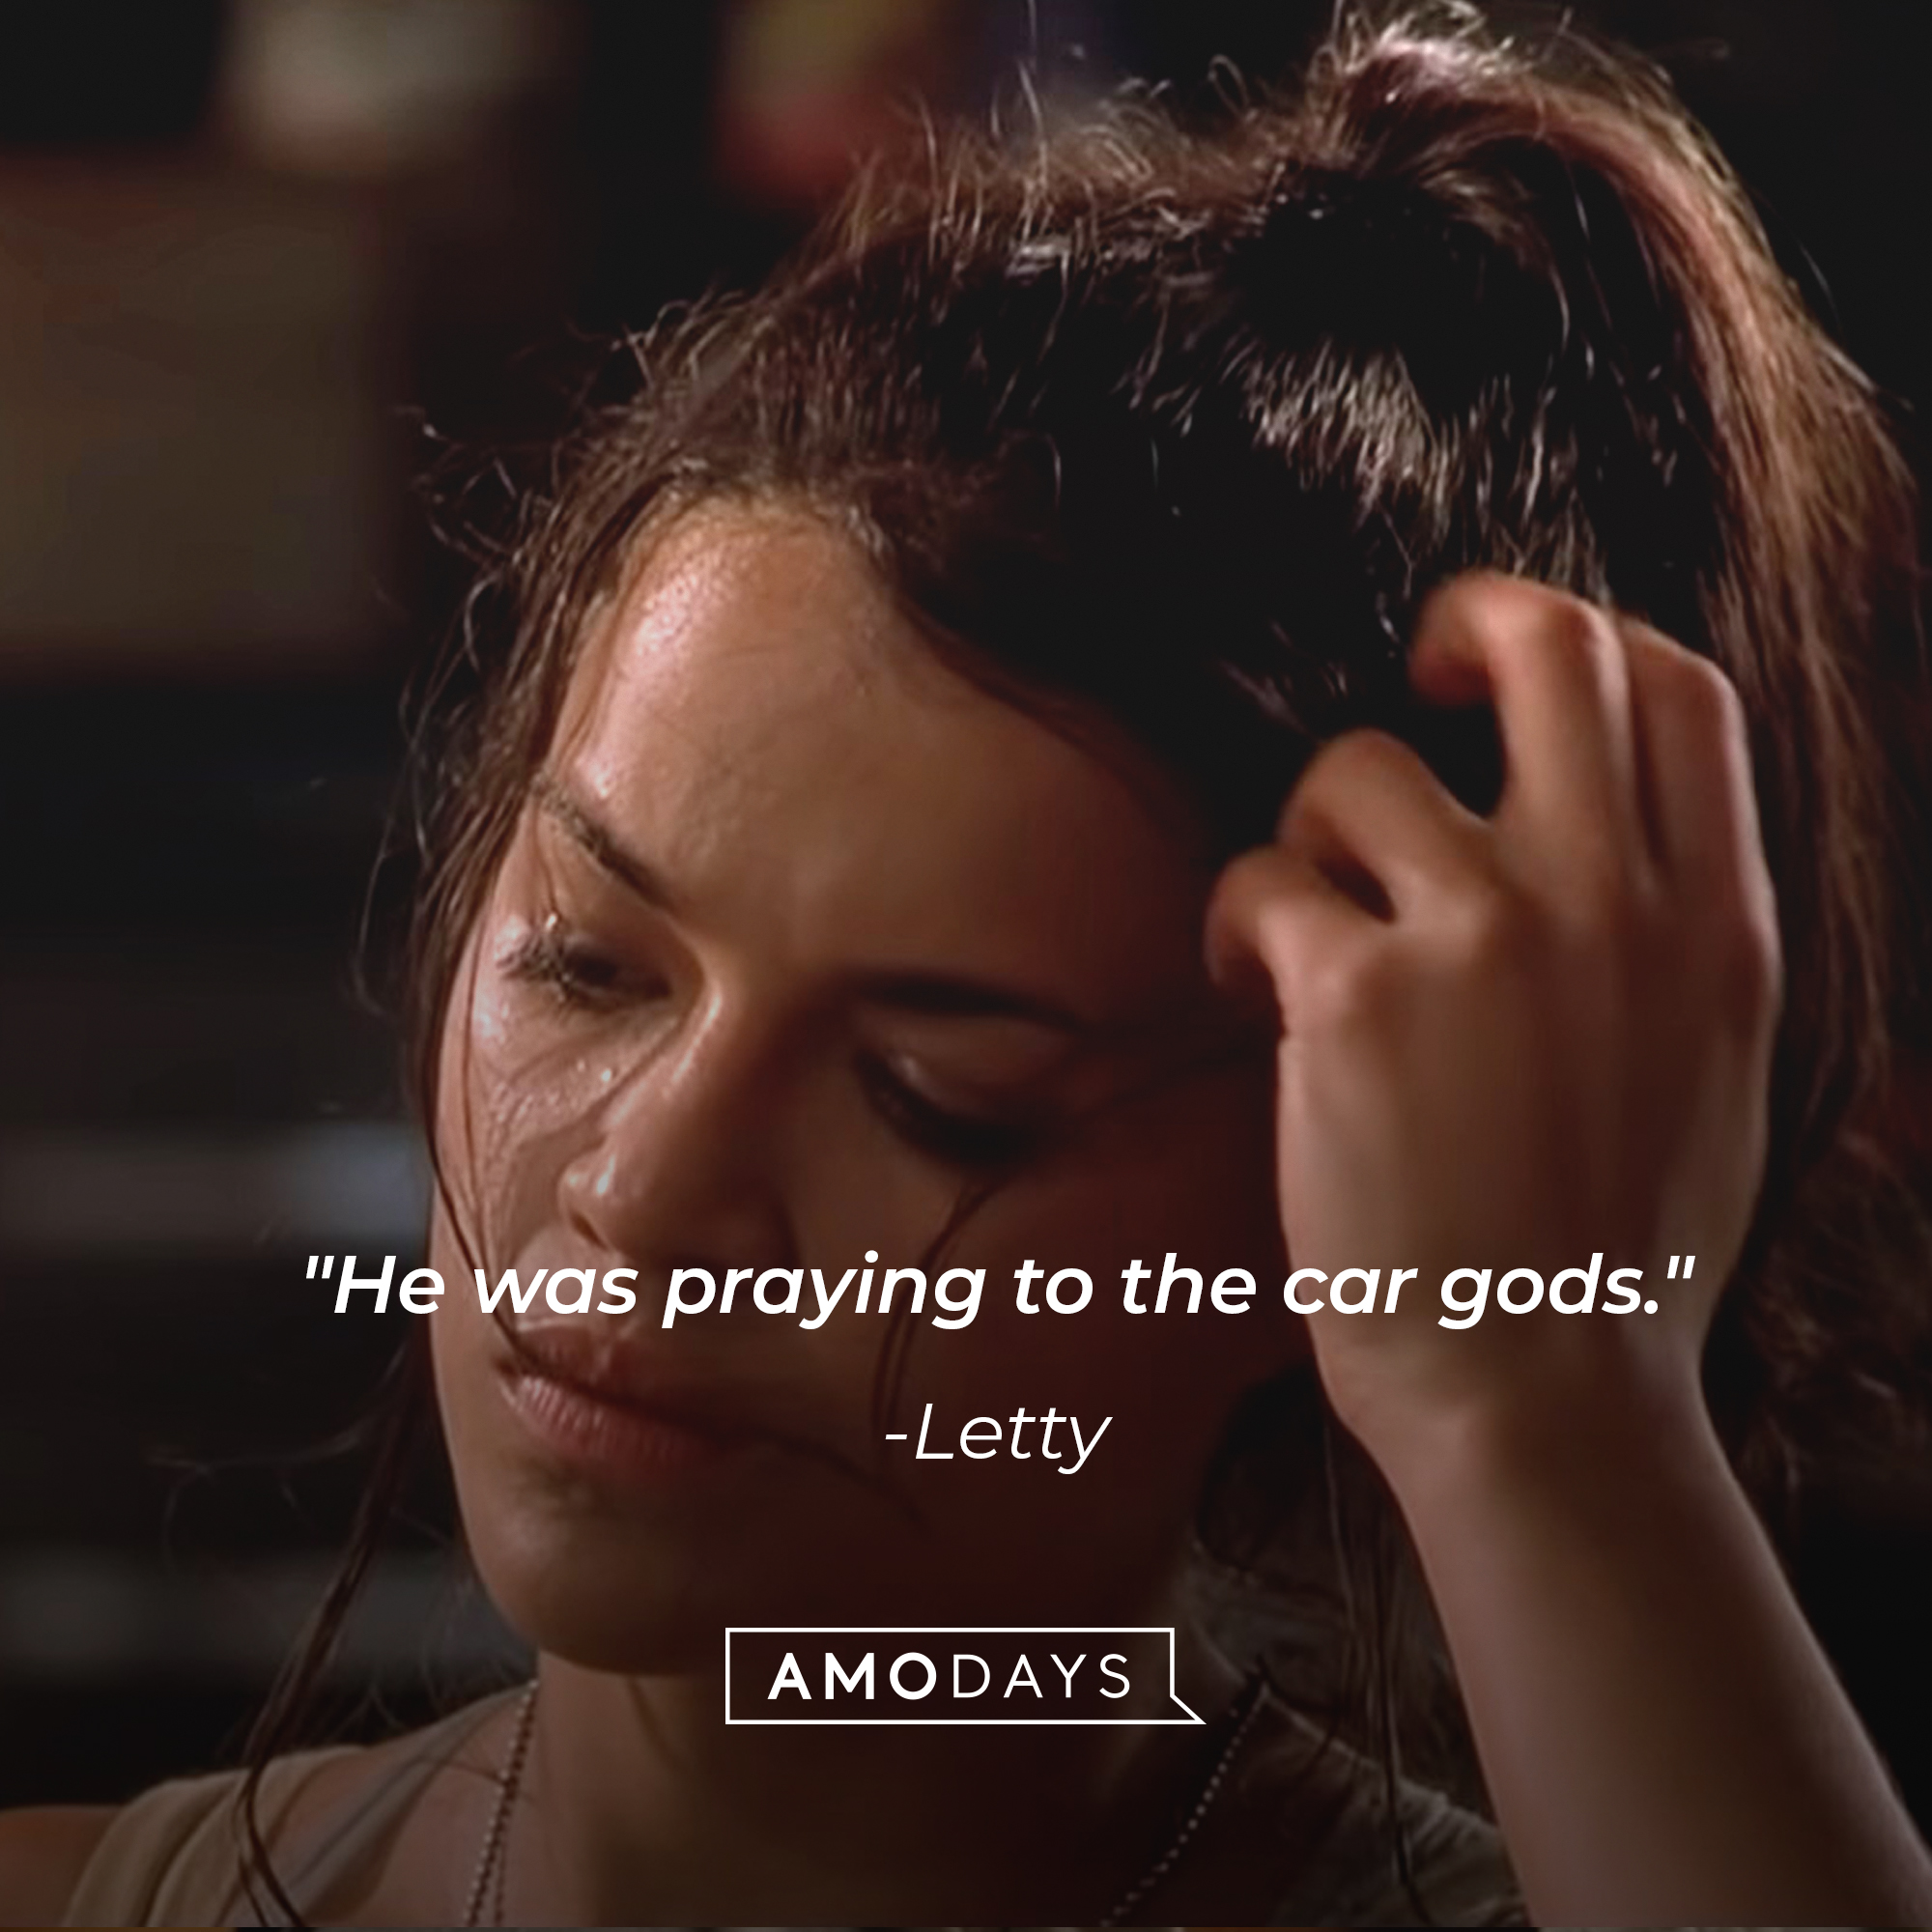 Letty's quote: "He was praying to the car gods." | Source: facebook.com/TheFastSaga